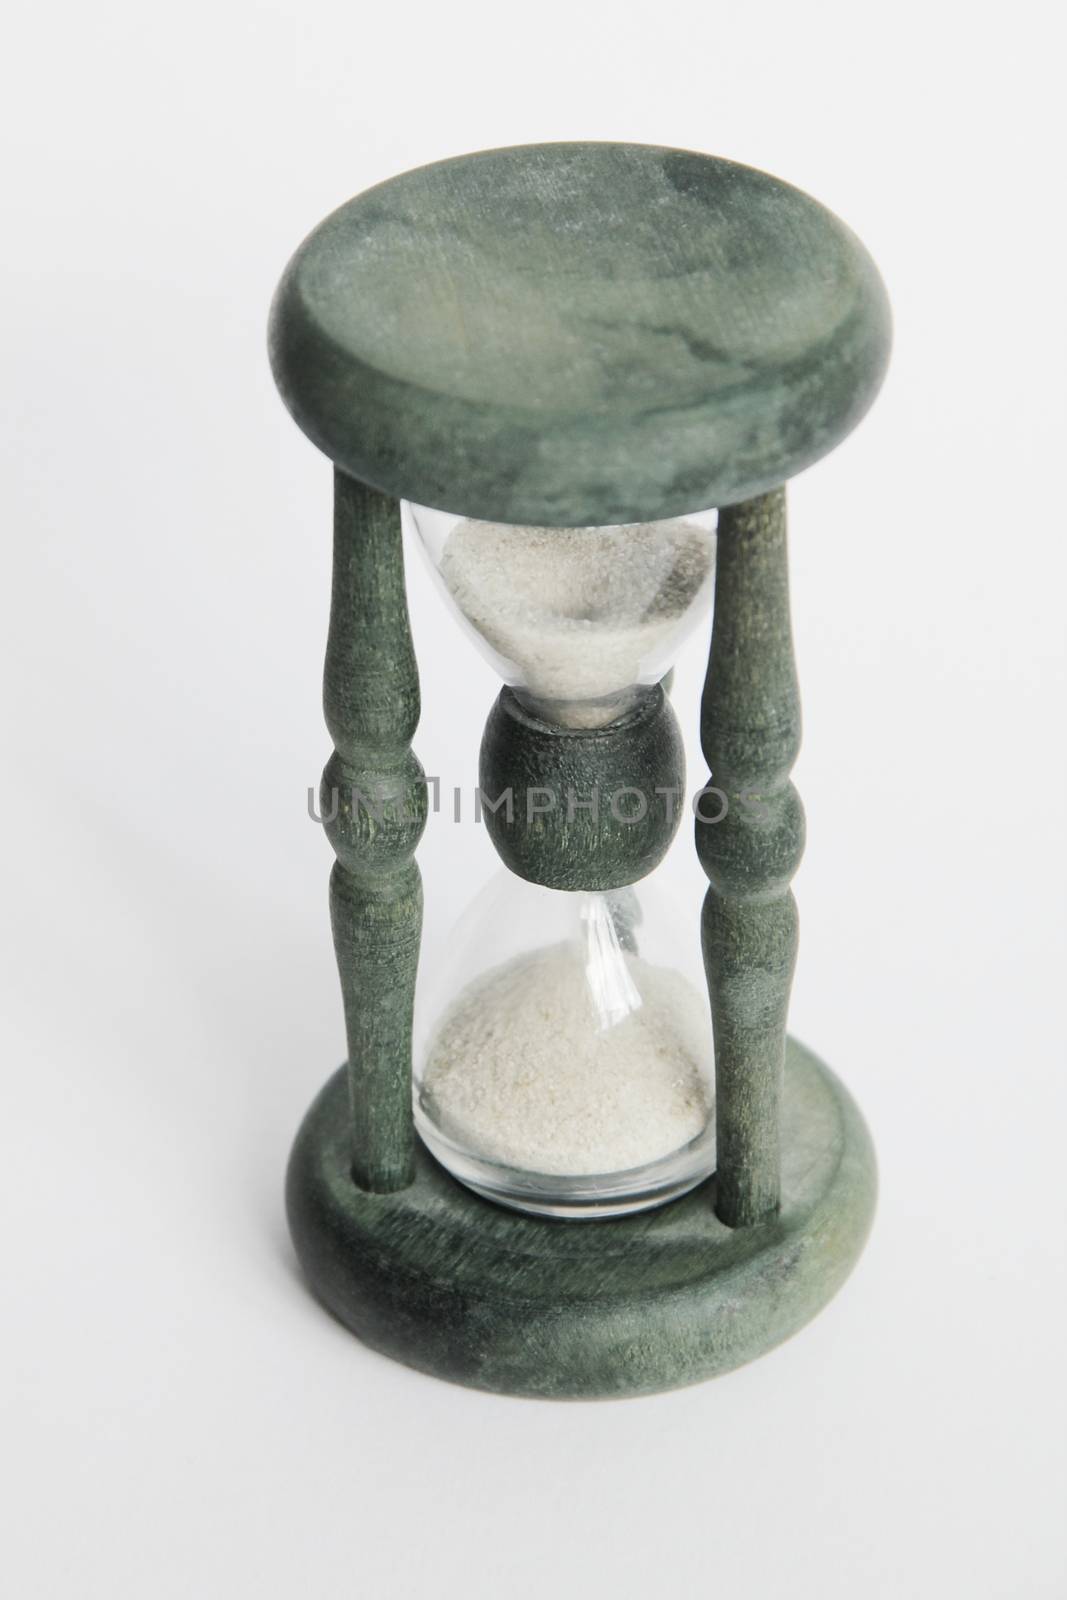 Hourglass with sand by Voinakh